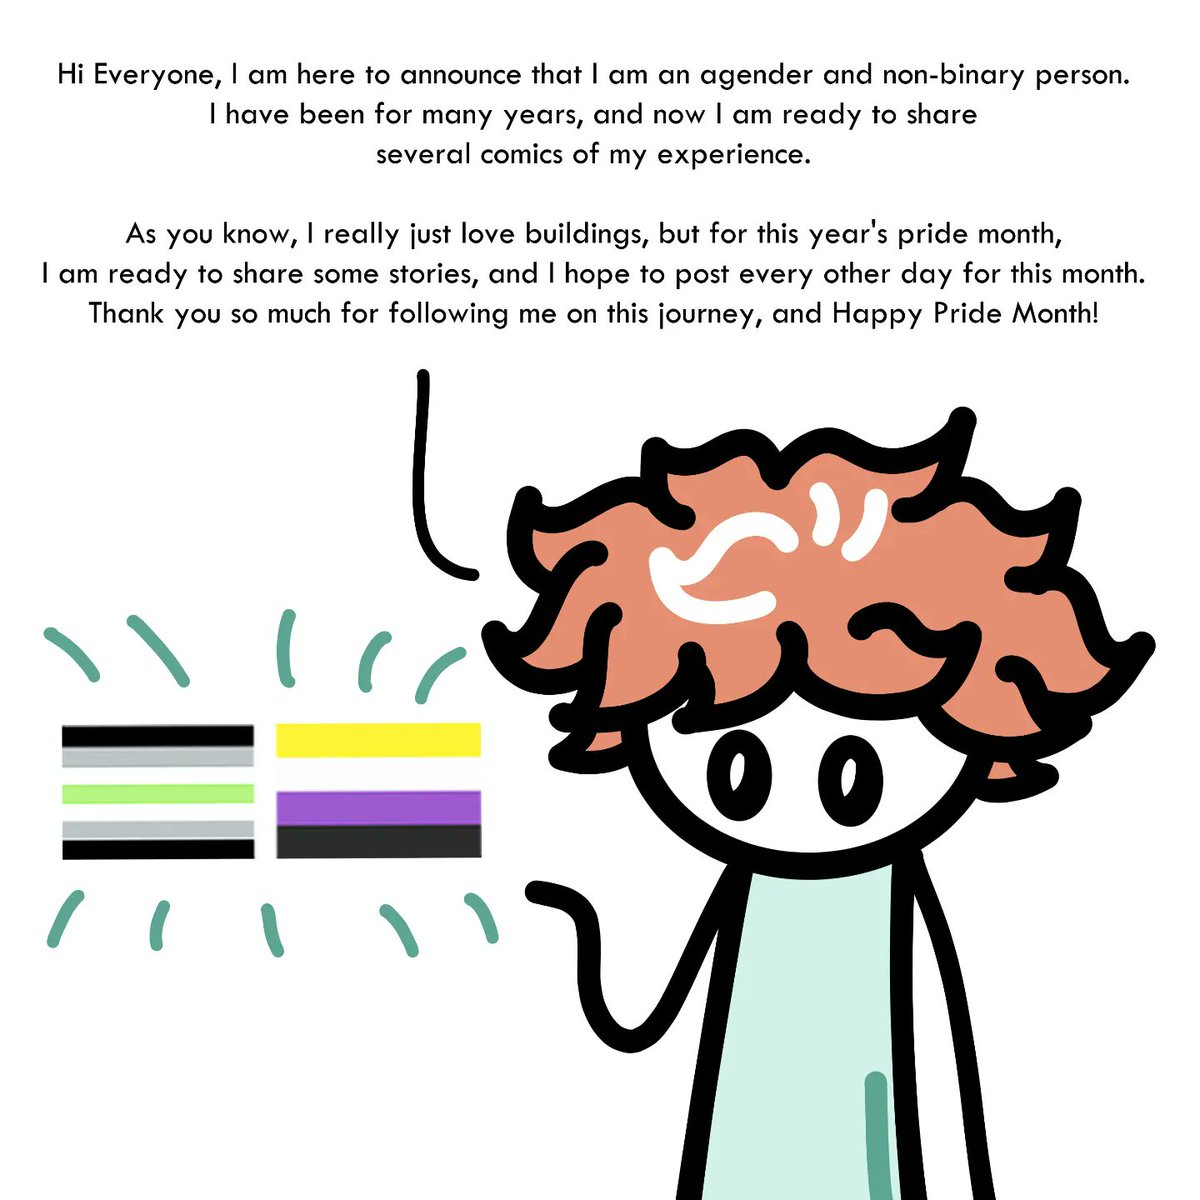 I am coming out to the world 👾 I am non-binary and agender. Happy Pride Month! :3

#nonbinary
#agender
#enby
#enbypride

#ijustlovebuildings